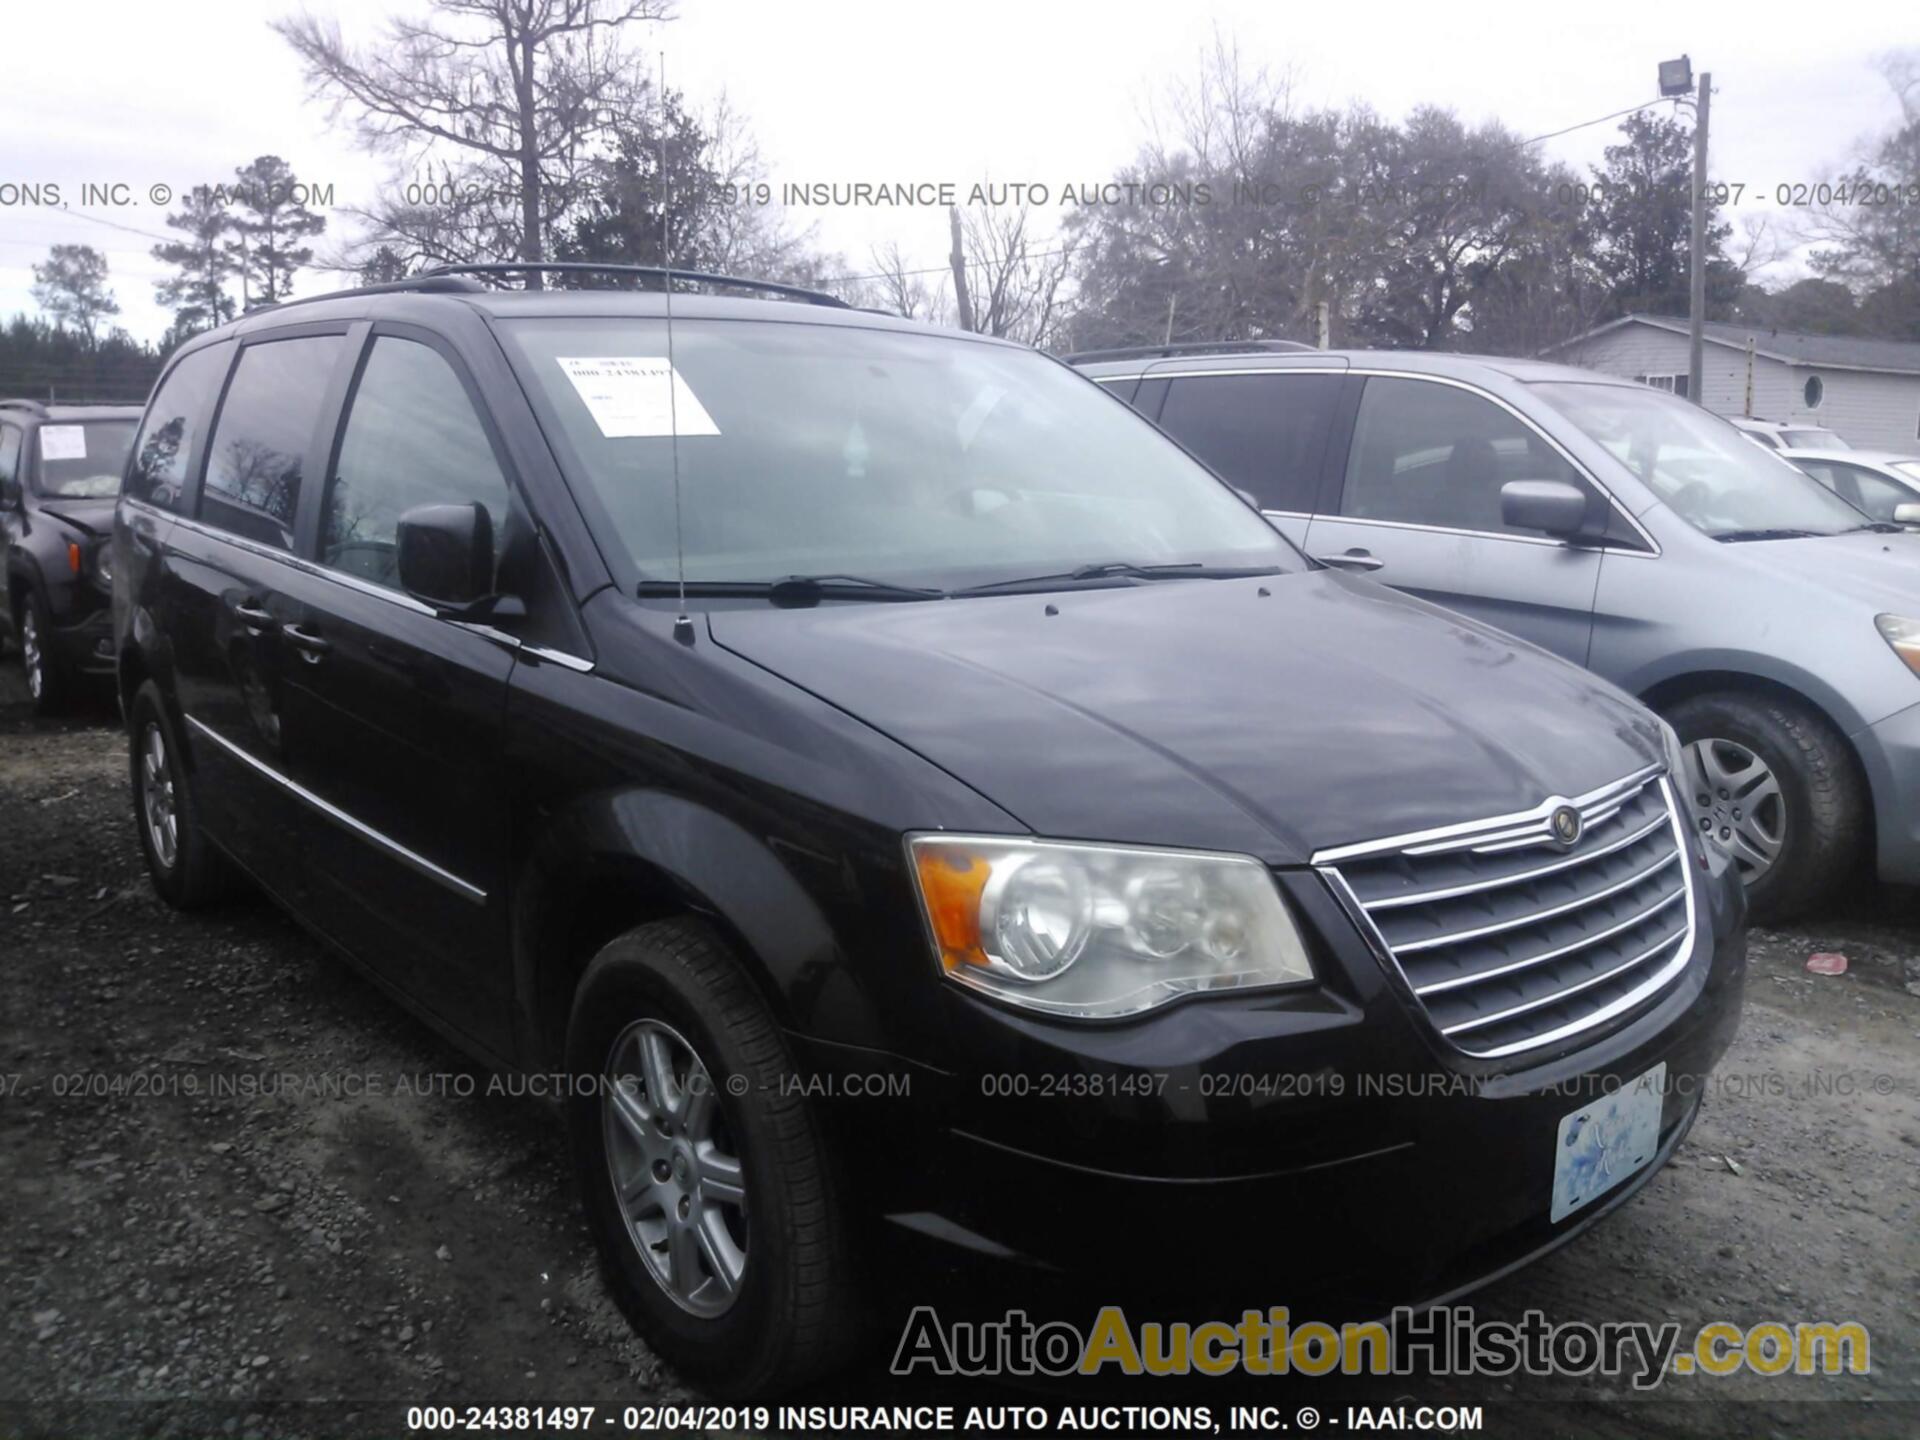 2010 CHRYSLER TOWN and COUNTR, 2A4RR5D10AR392640